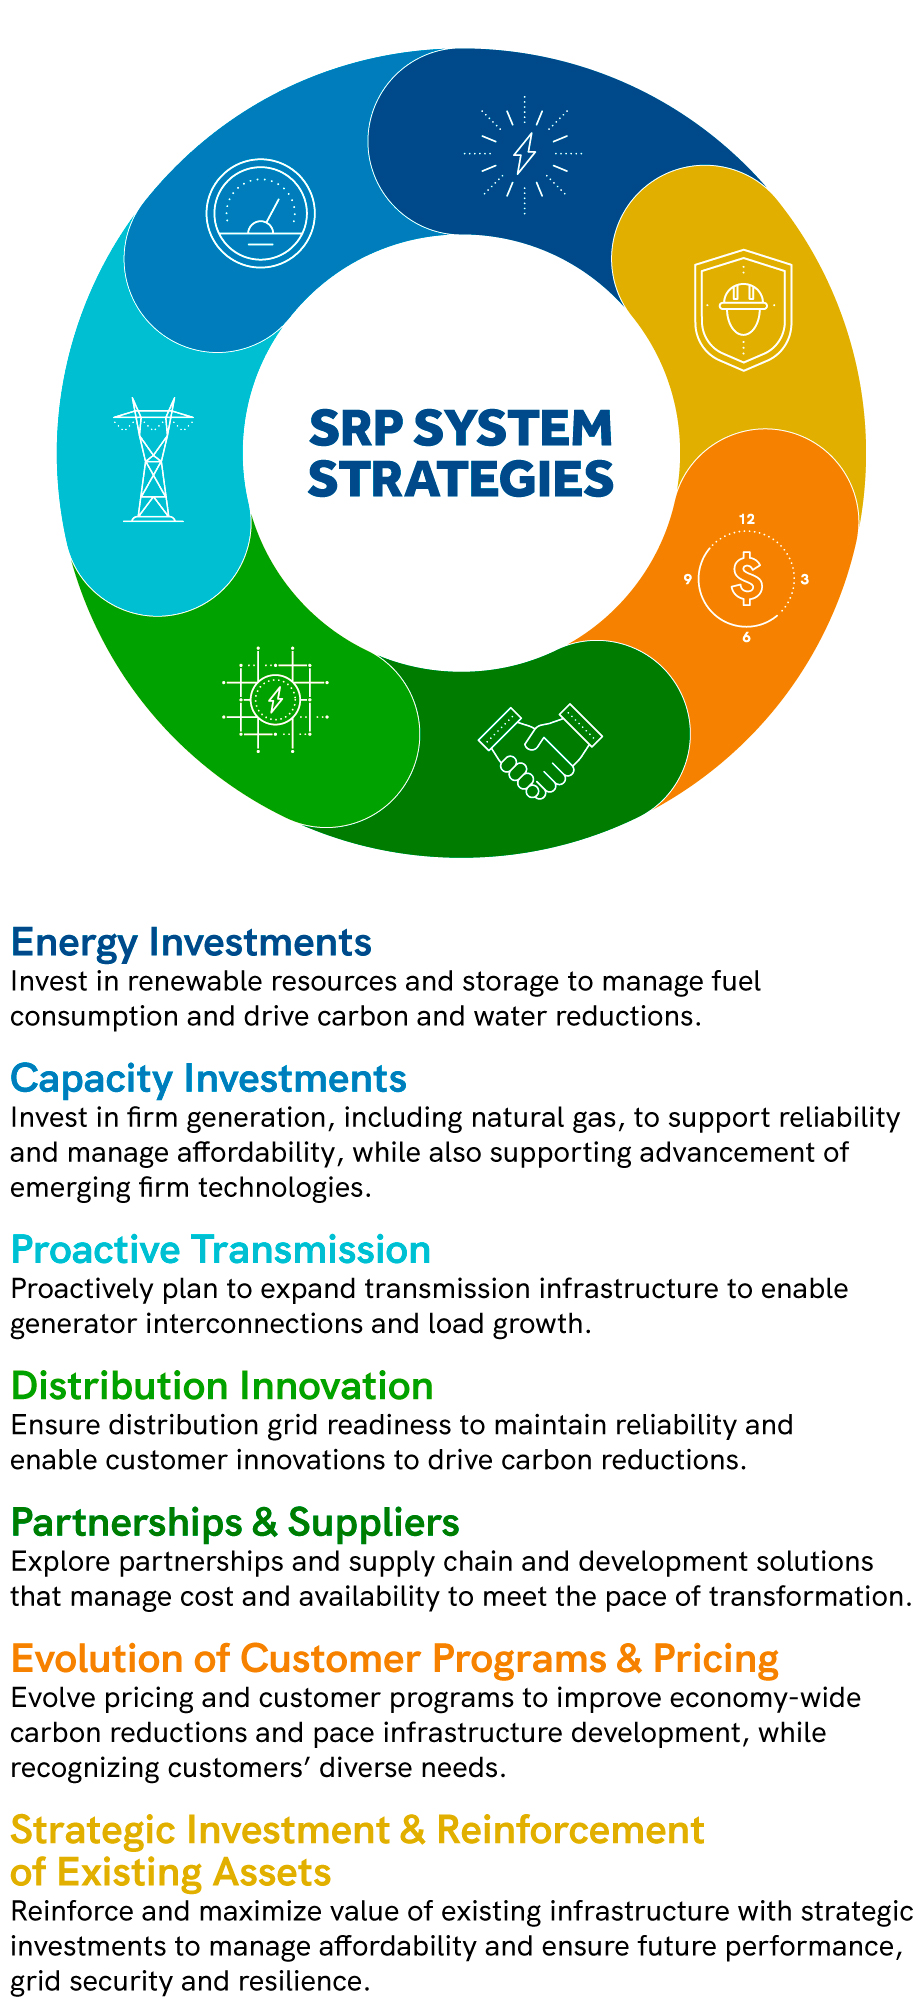 SRP SYSTEM STRATEGIES. Energy InvestmentsInvest in renewable resources and storage to manage fuel consumption and drive carbon and water reductions. Capacity InvestmentsInvest in firm generation, including natural gas, to support reliability and manage affordability, while also supporting advancement of emerging firm technologies. Proactive TransmissionProactively plan to expand transmission infrastructure to enable generator interconnections and load growth. Distribution InnovationEnsure distribution grid readiness to maintain reliability and enable customer innovations to drive carbon reductions. Partnerships & SuppliersExplore partnerships and supply chain and development solutions that manage cost and availability to meet the pace of transformation. Evolution of Customer Programs & PricingEvolve pricing and customer programs to improve economy-wide carbon reductions and pace infrastructure development, while recognizing customers’ diverse needs. Strategic Investment & Reinforcement of Existing AssetsReinforce and maximize value of existing infrastructure with strategic investments to manage affordability and ensure future performance, grid security and resilience.